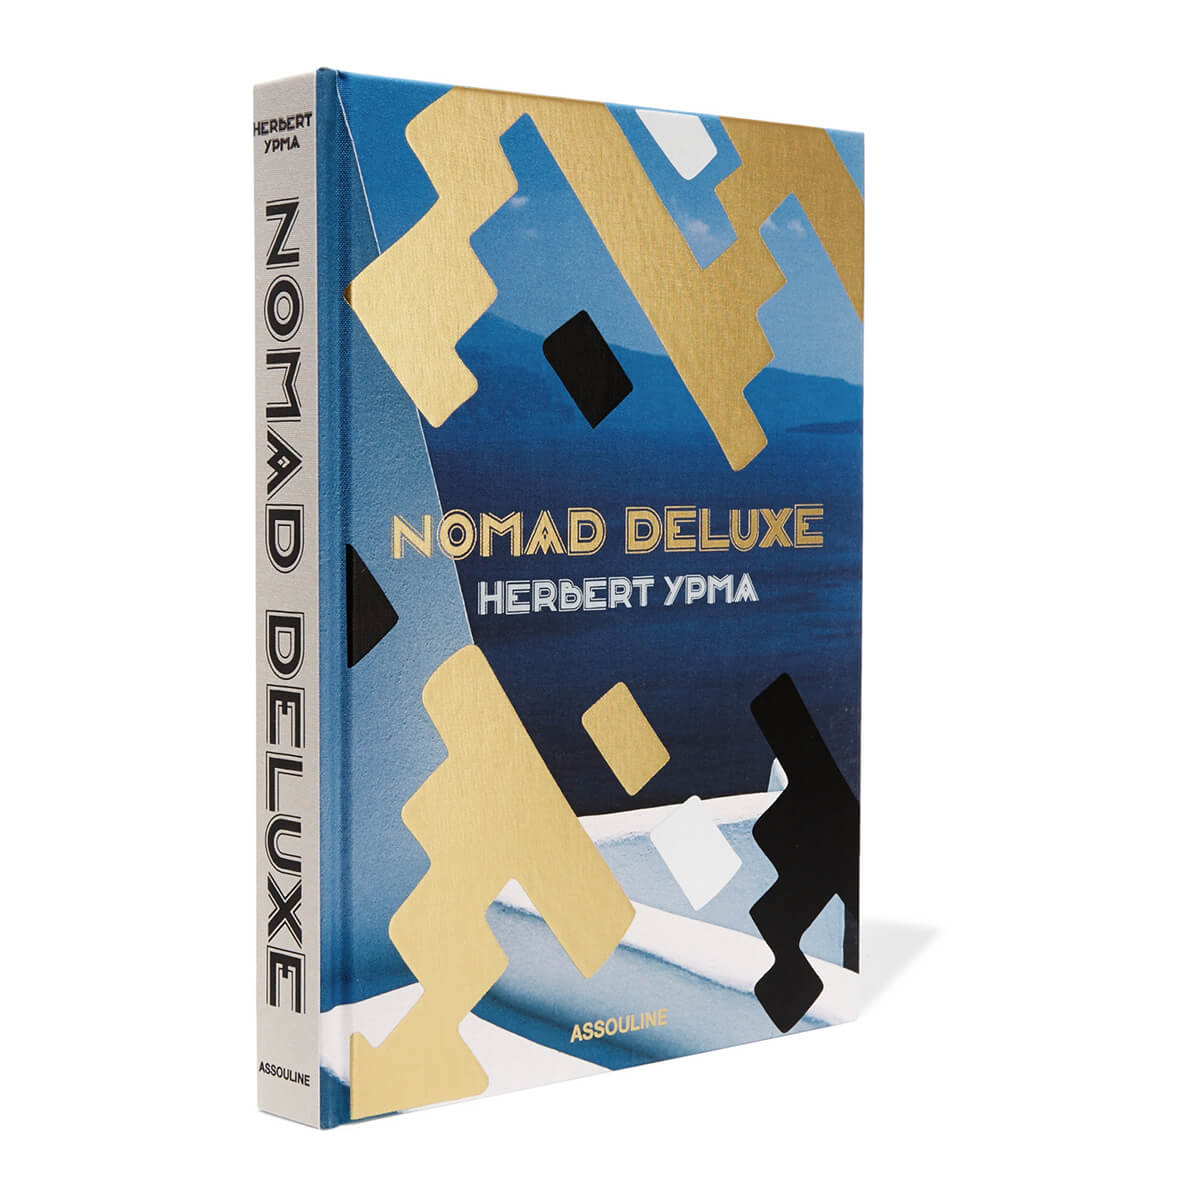 Nomad Deluxe Book